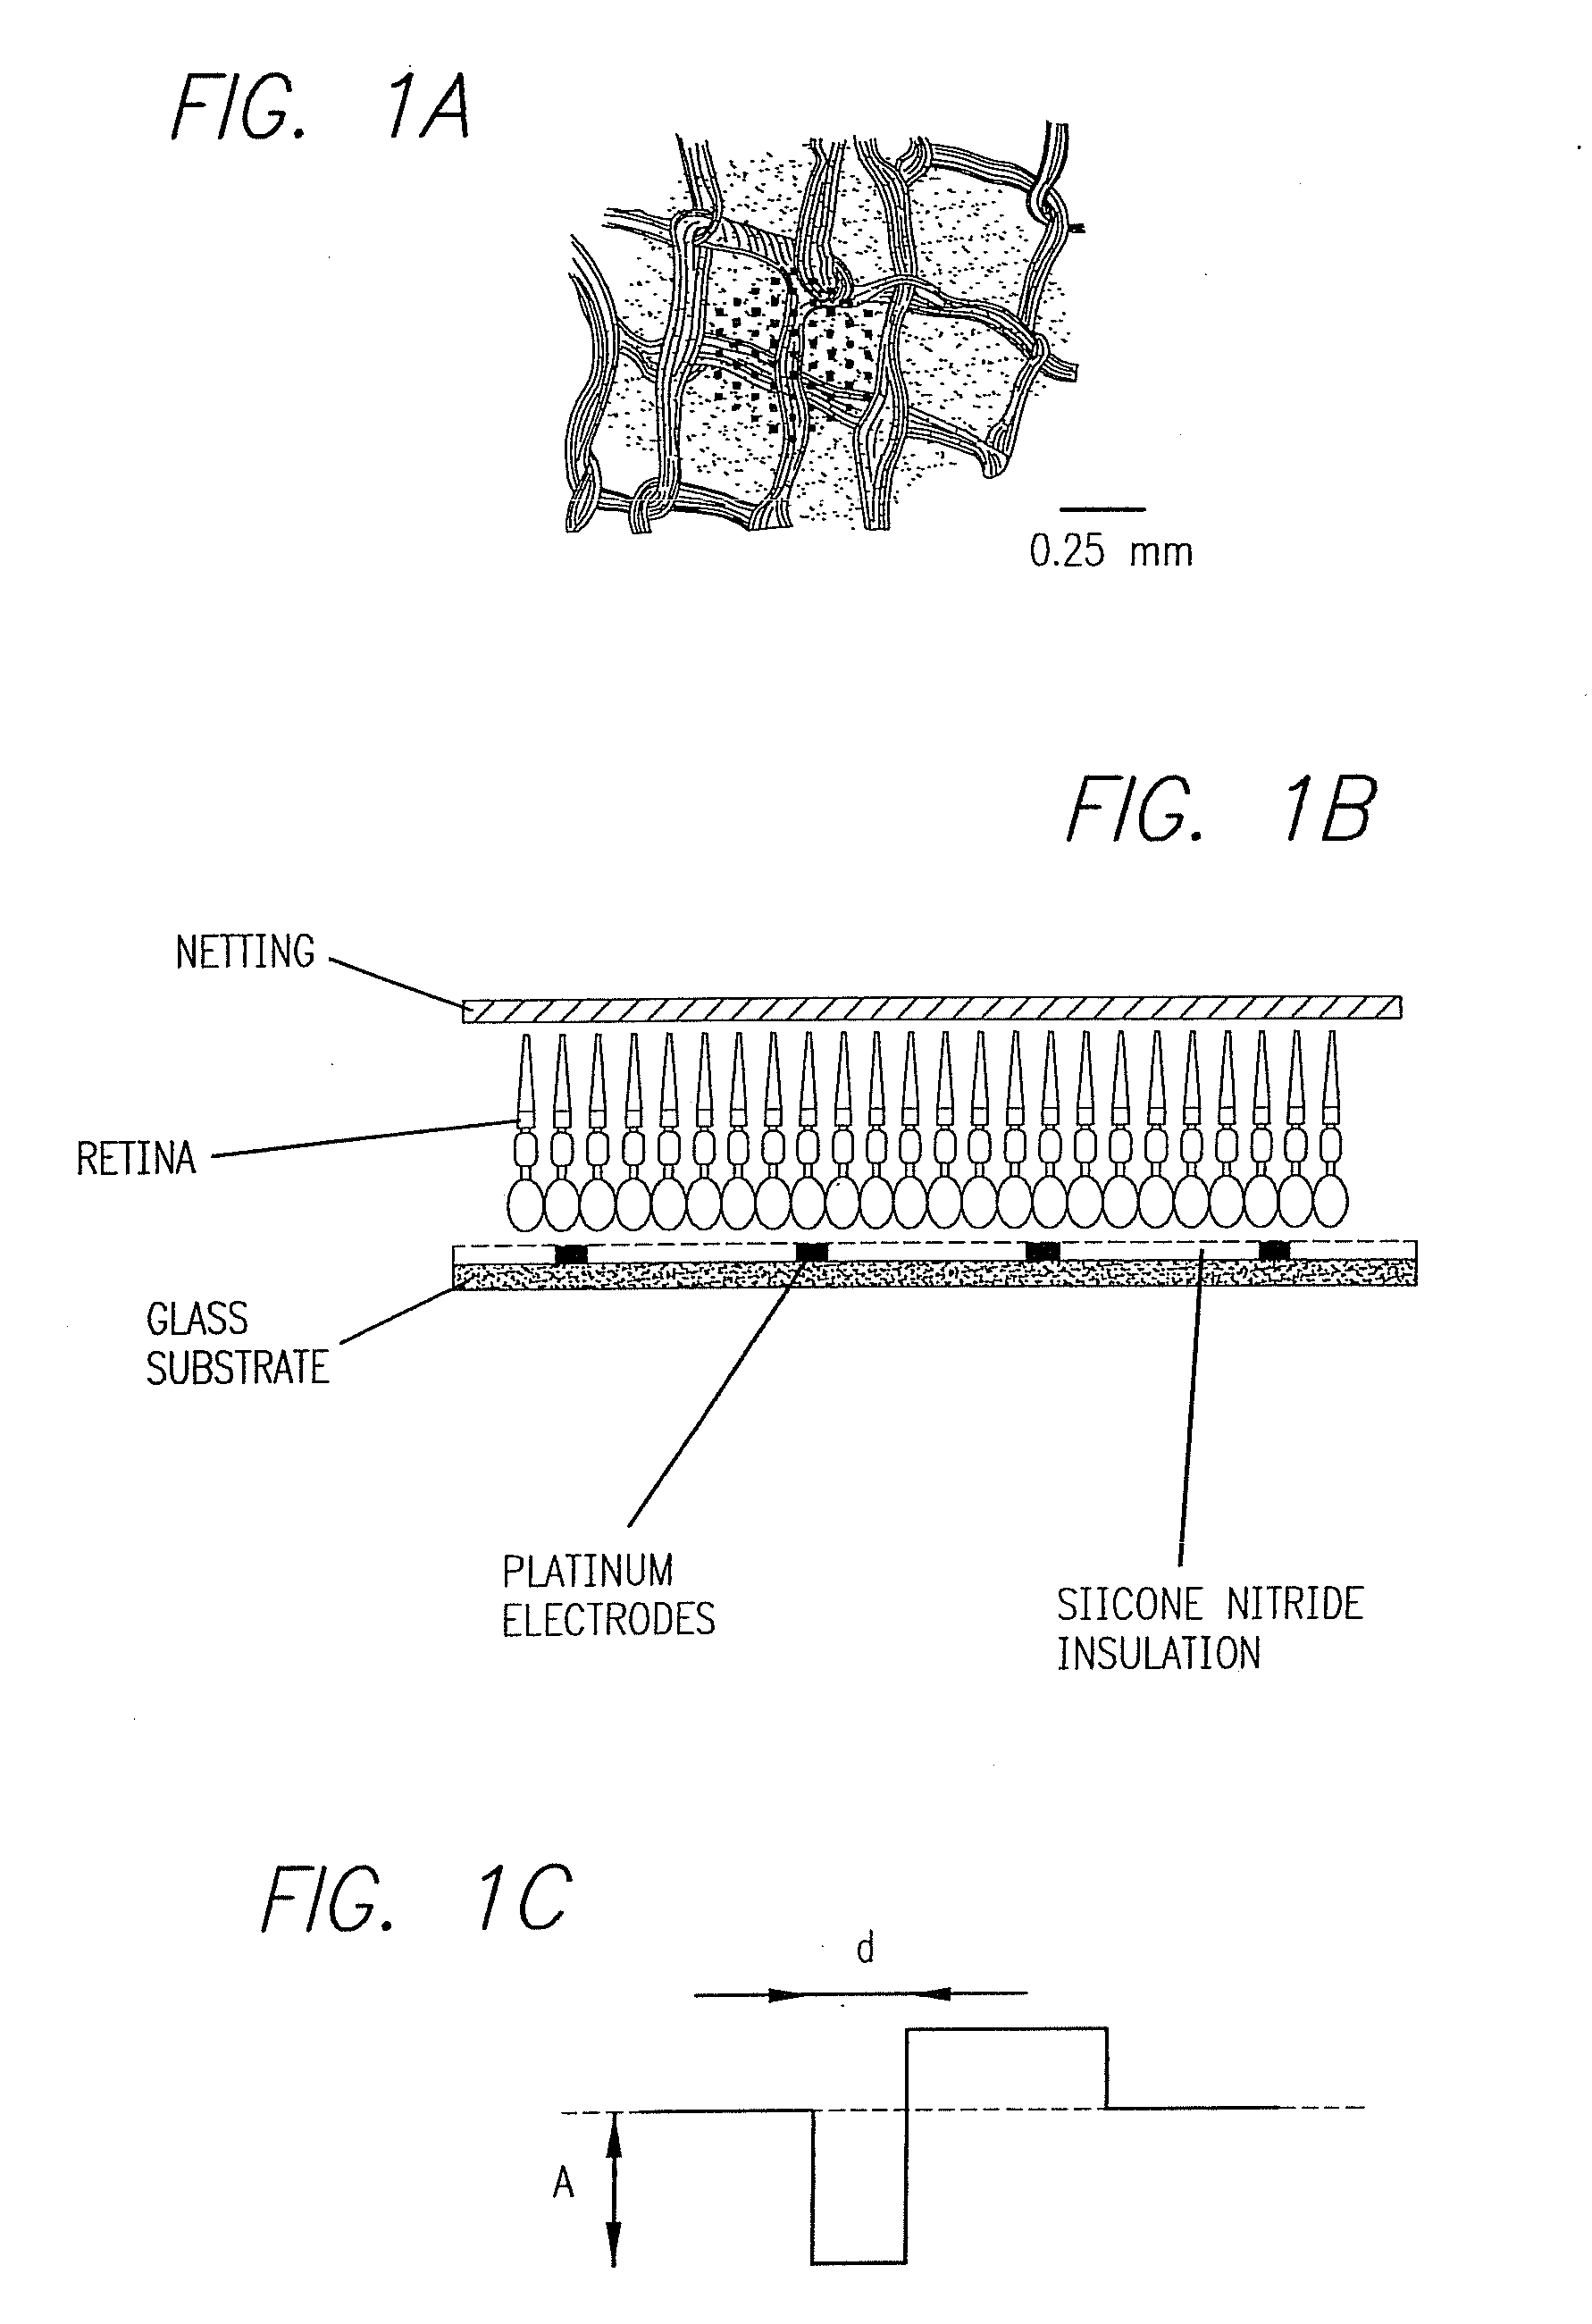 Method and Apparatus for Visual Neural Stimulation